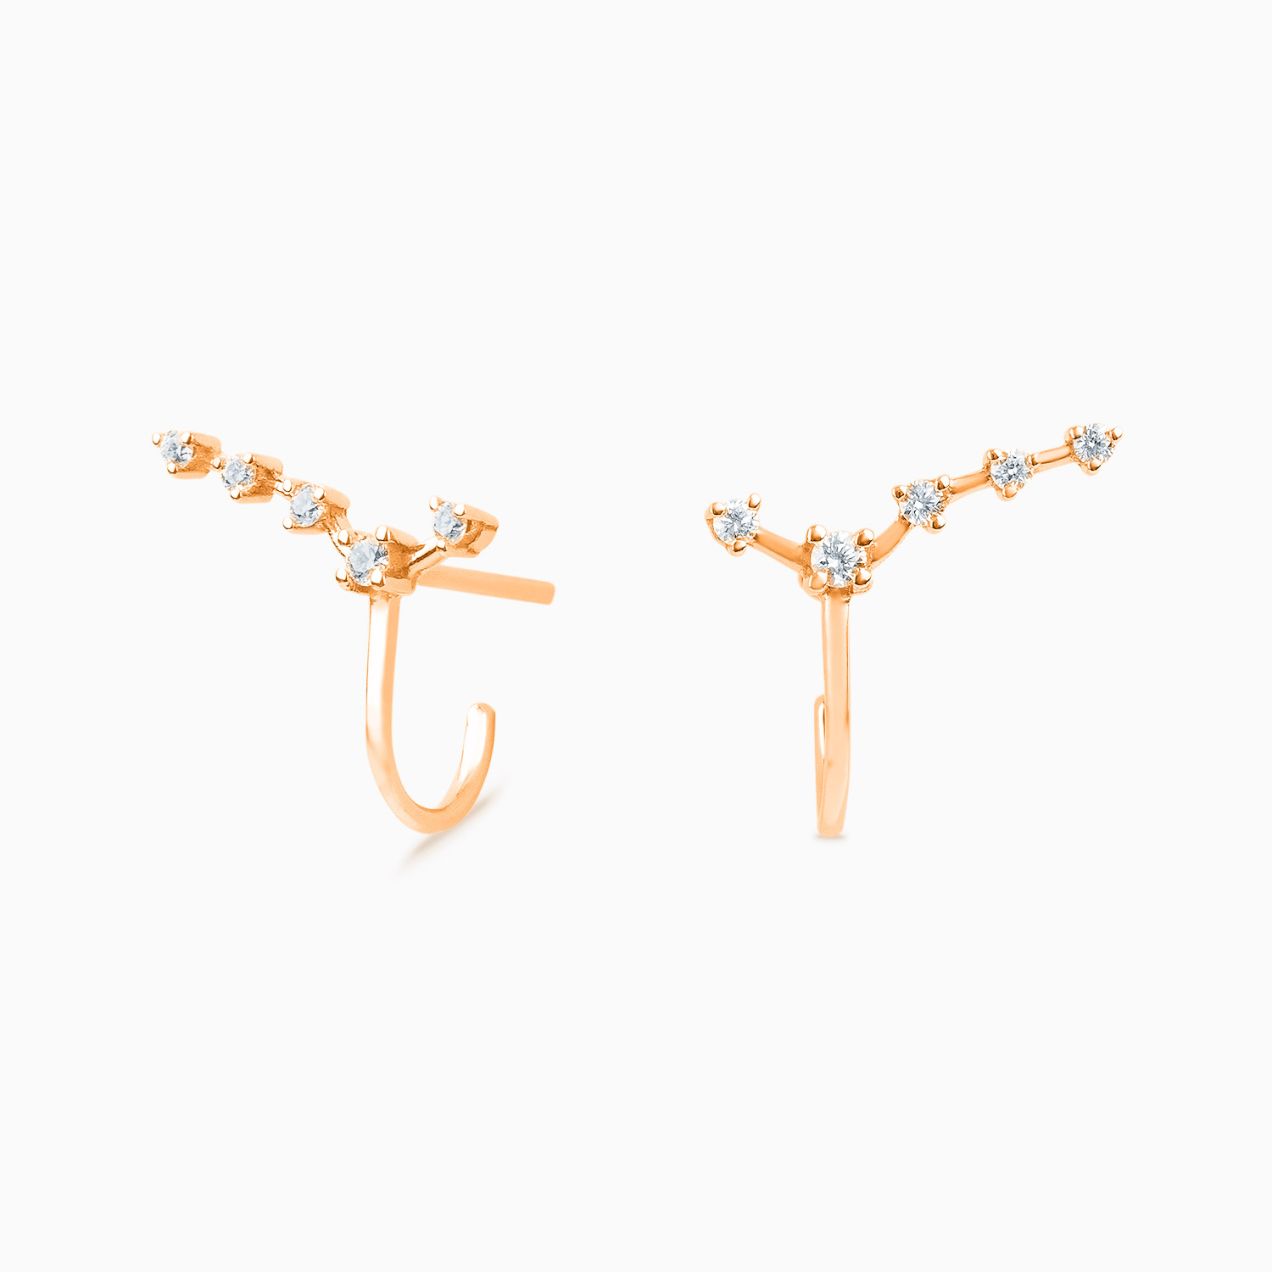 Rose gold climbing earrings with five diamonds